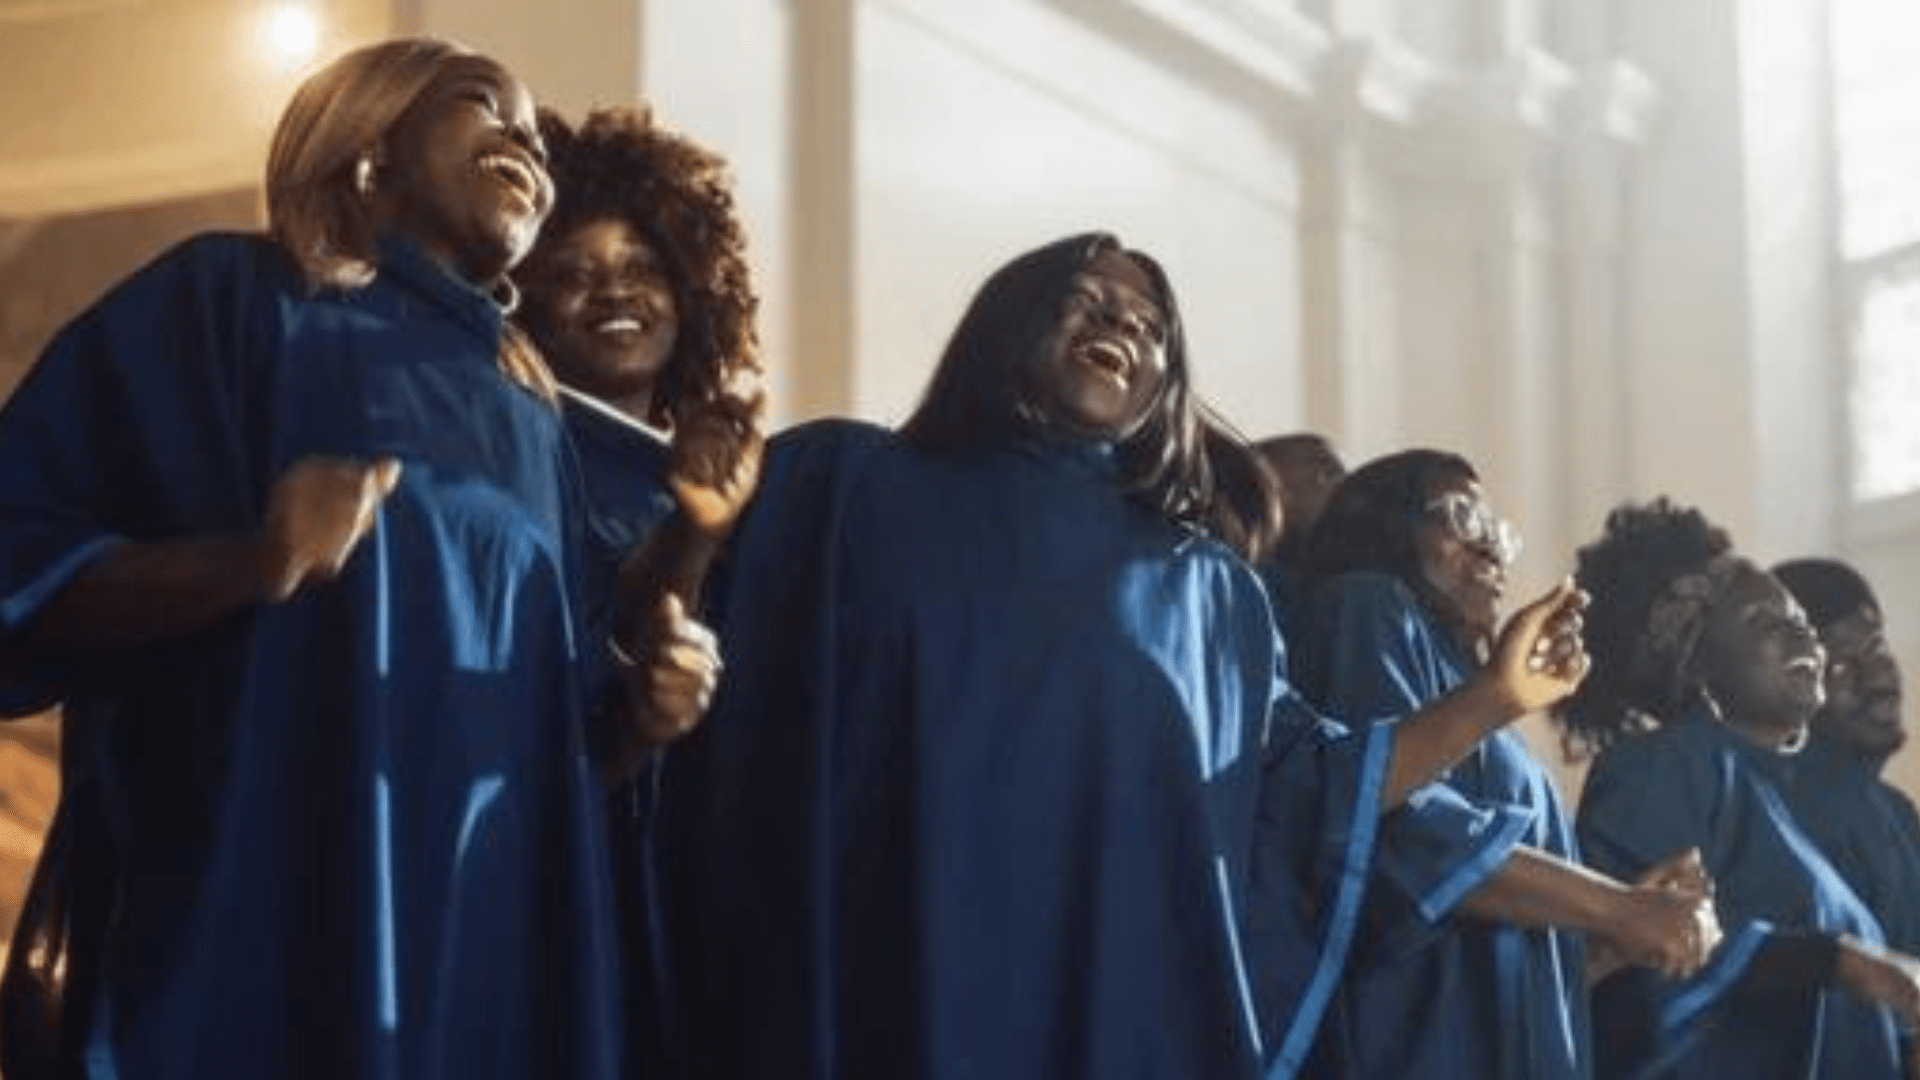 Join the Gospel Choir Competition at Mississippi’s “Be in Good Health” Symposium: A Day of Soulful Music, Valuable Health Information, and Free Screenings